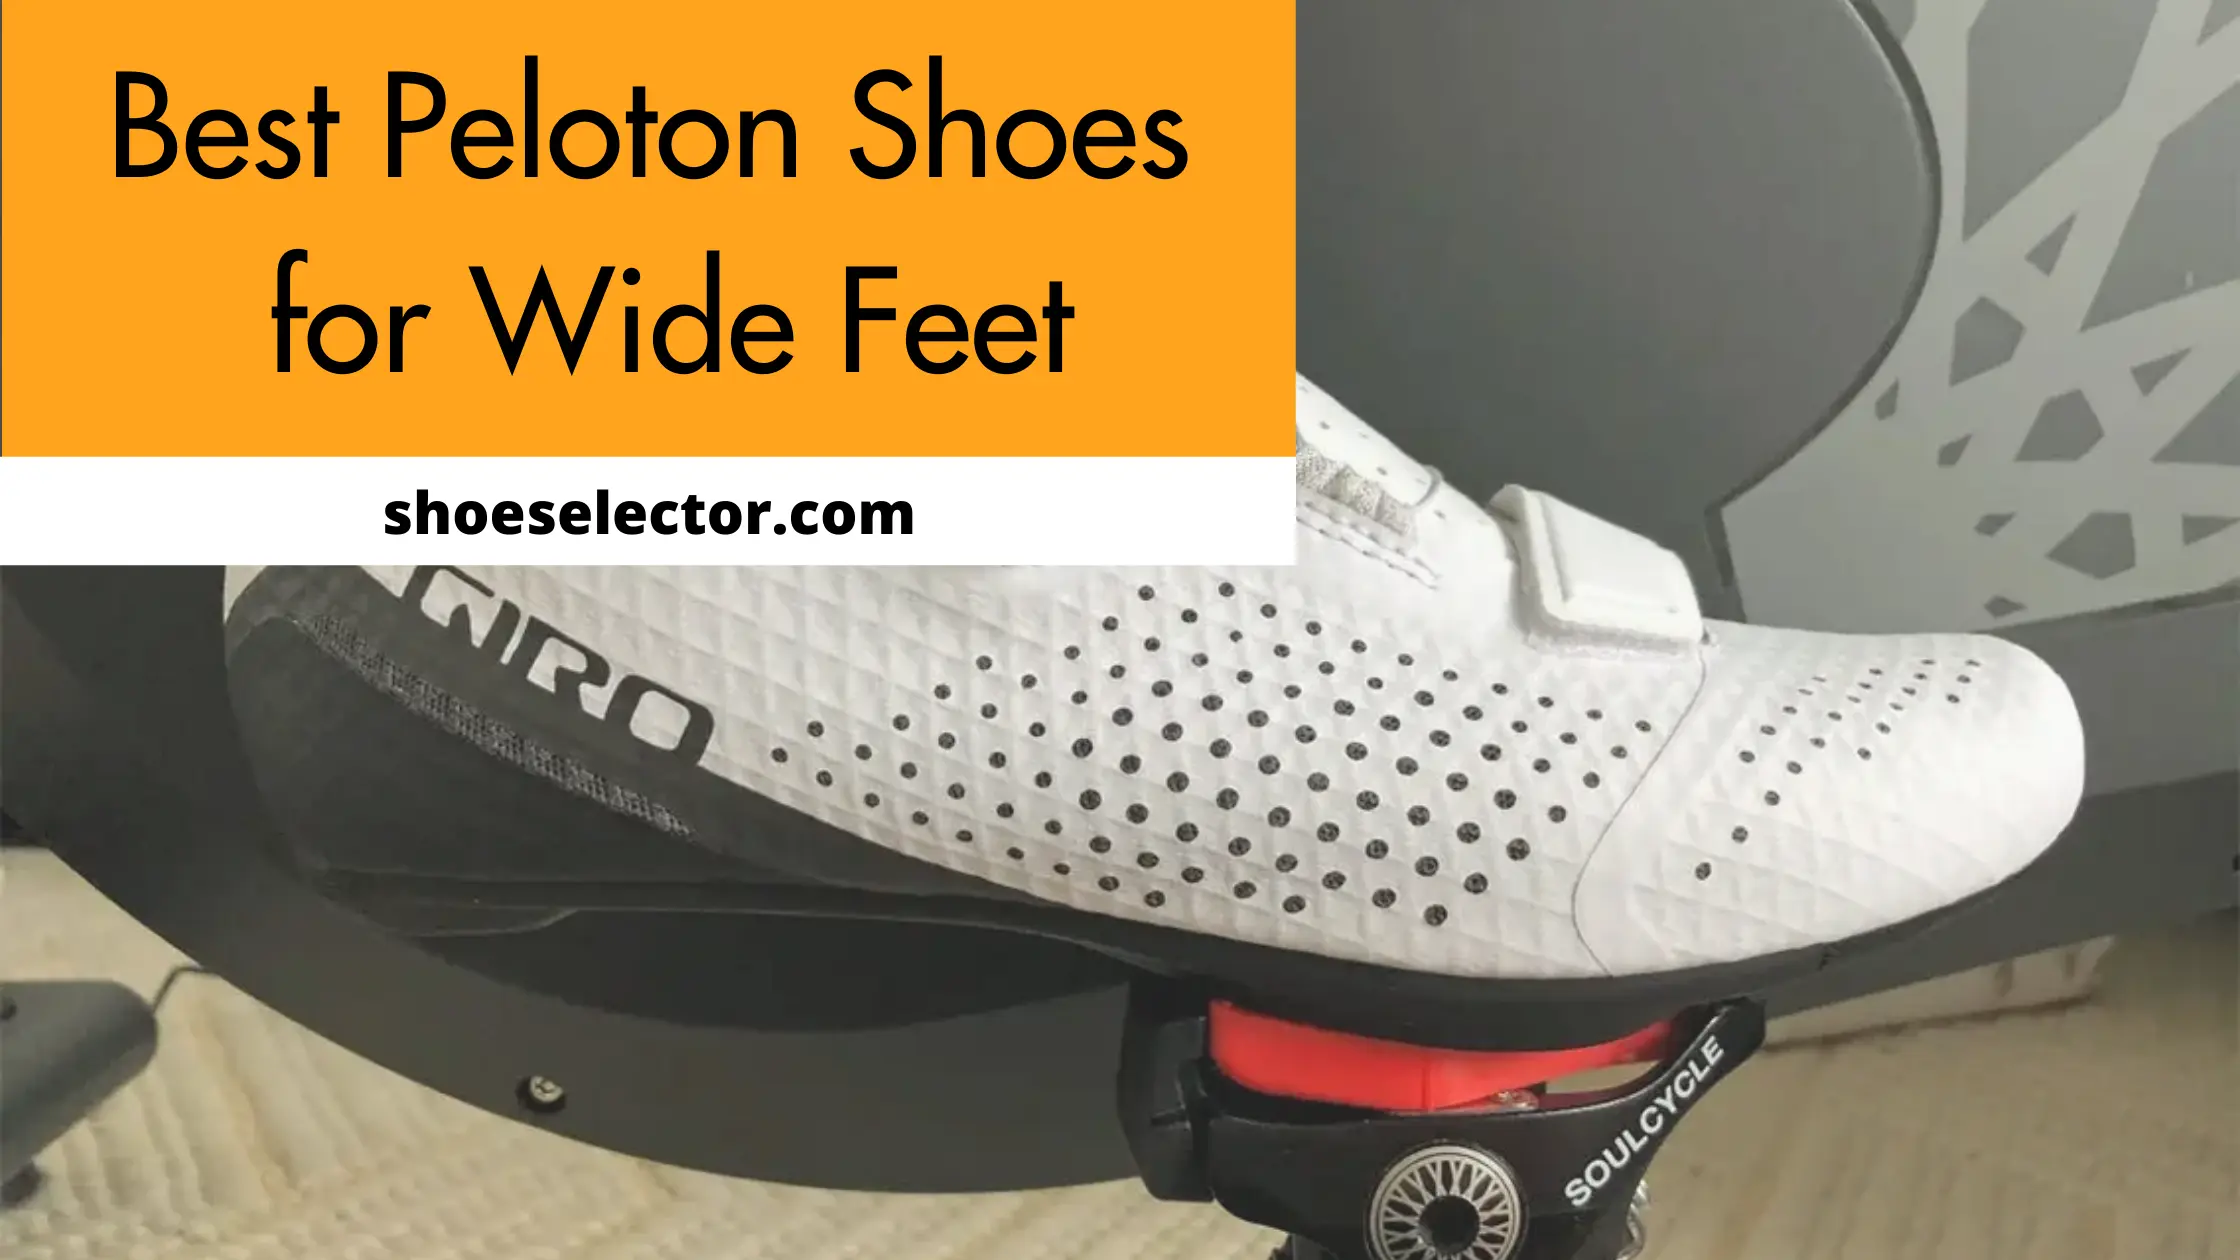 Best Peloton Shoes For Wide Feet - Top Products Comparison